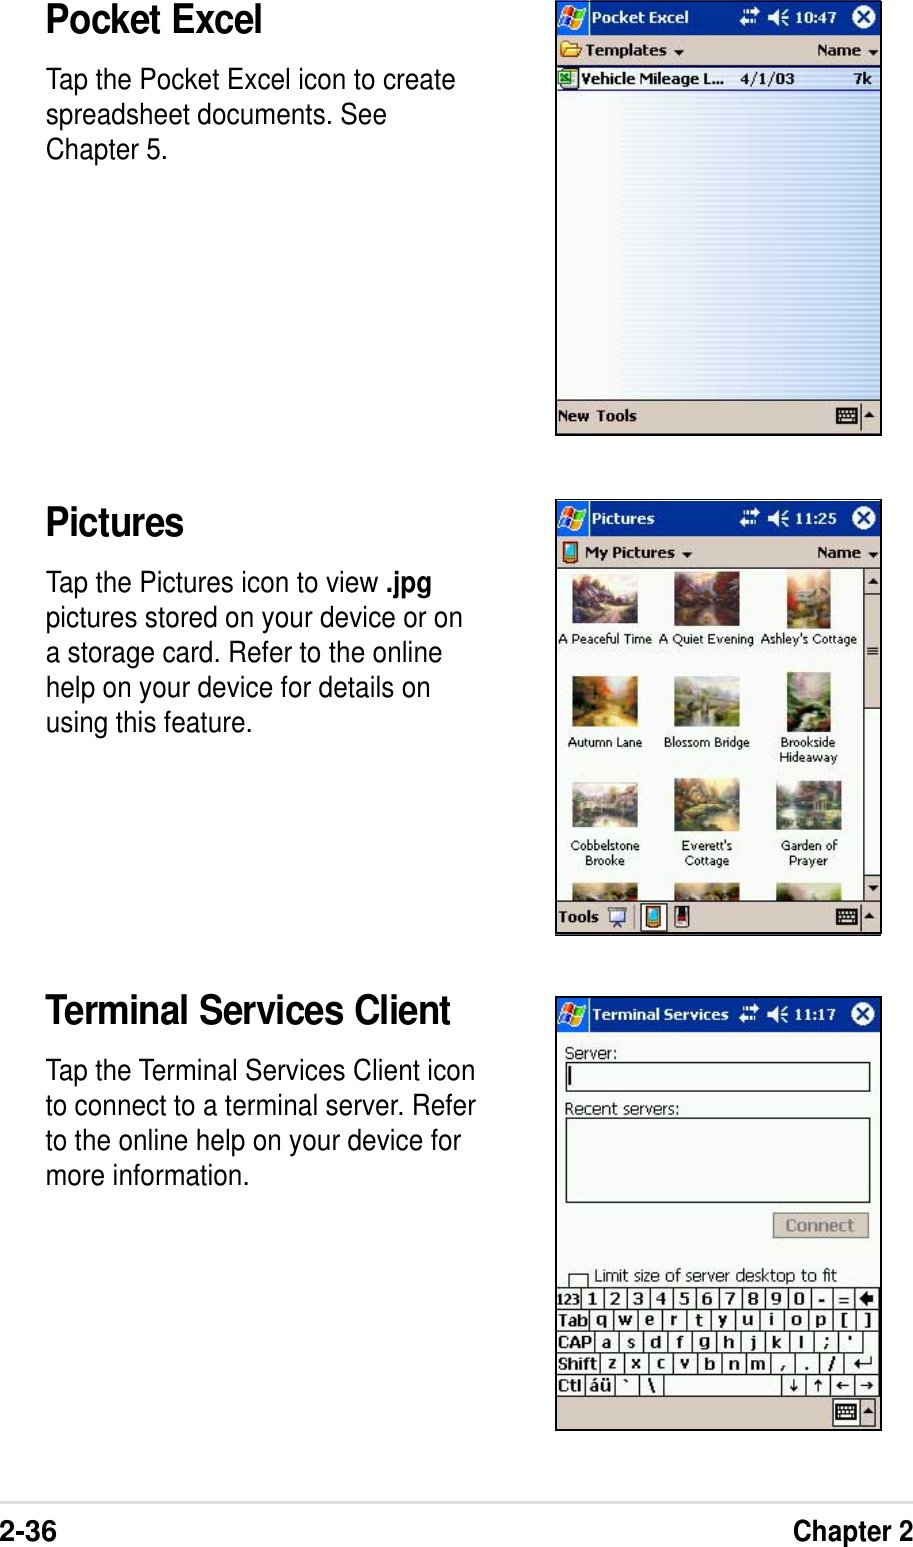 2-36Chapter 2Pocket ExcelTap the Pocket Excel icon to createspreadsheet documents. SeeChapter 5.PicturesTap the Pictures icon to view .jpgpictures stored on your device or ona storage card. Refer to the onlinehelp on your device for details onusing this feature.Terminal Services ClientTap the Terminal Services Client iconto connect to a terminal server. Referto the online help on your device formore information.